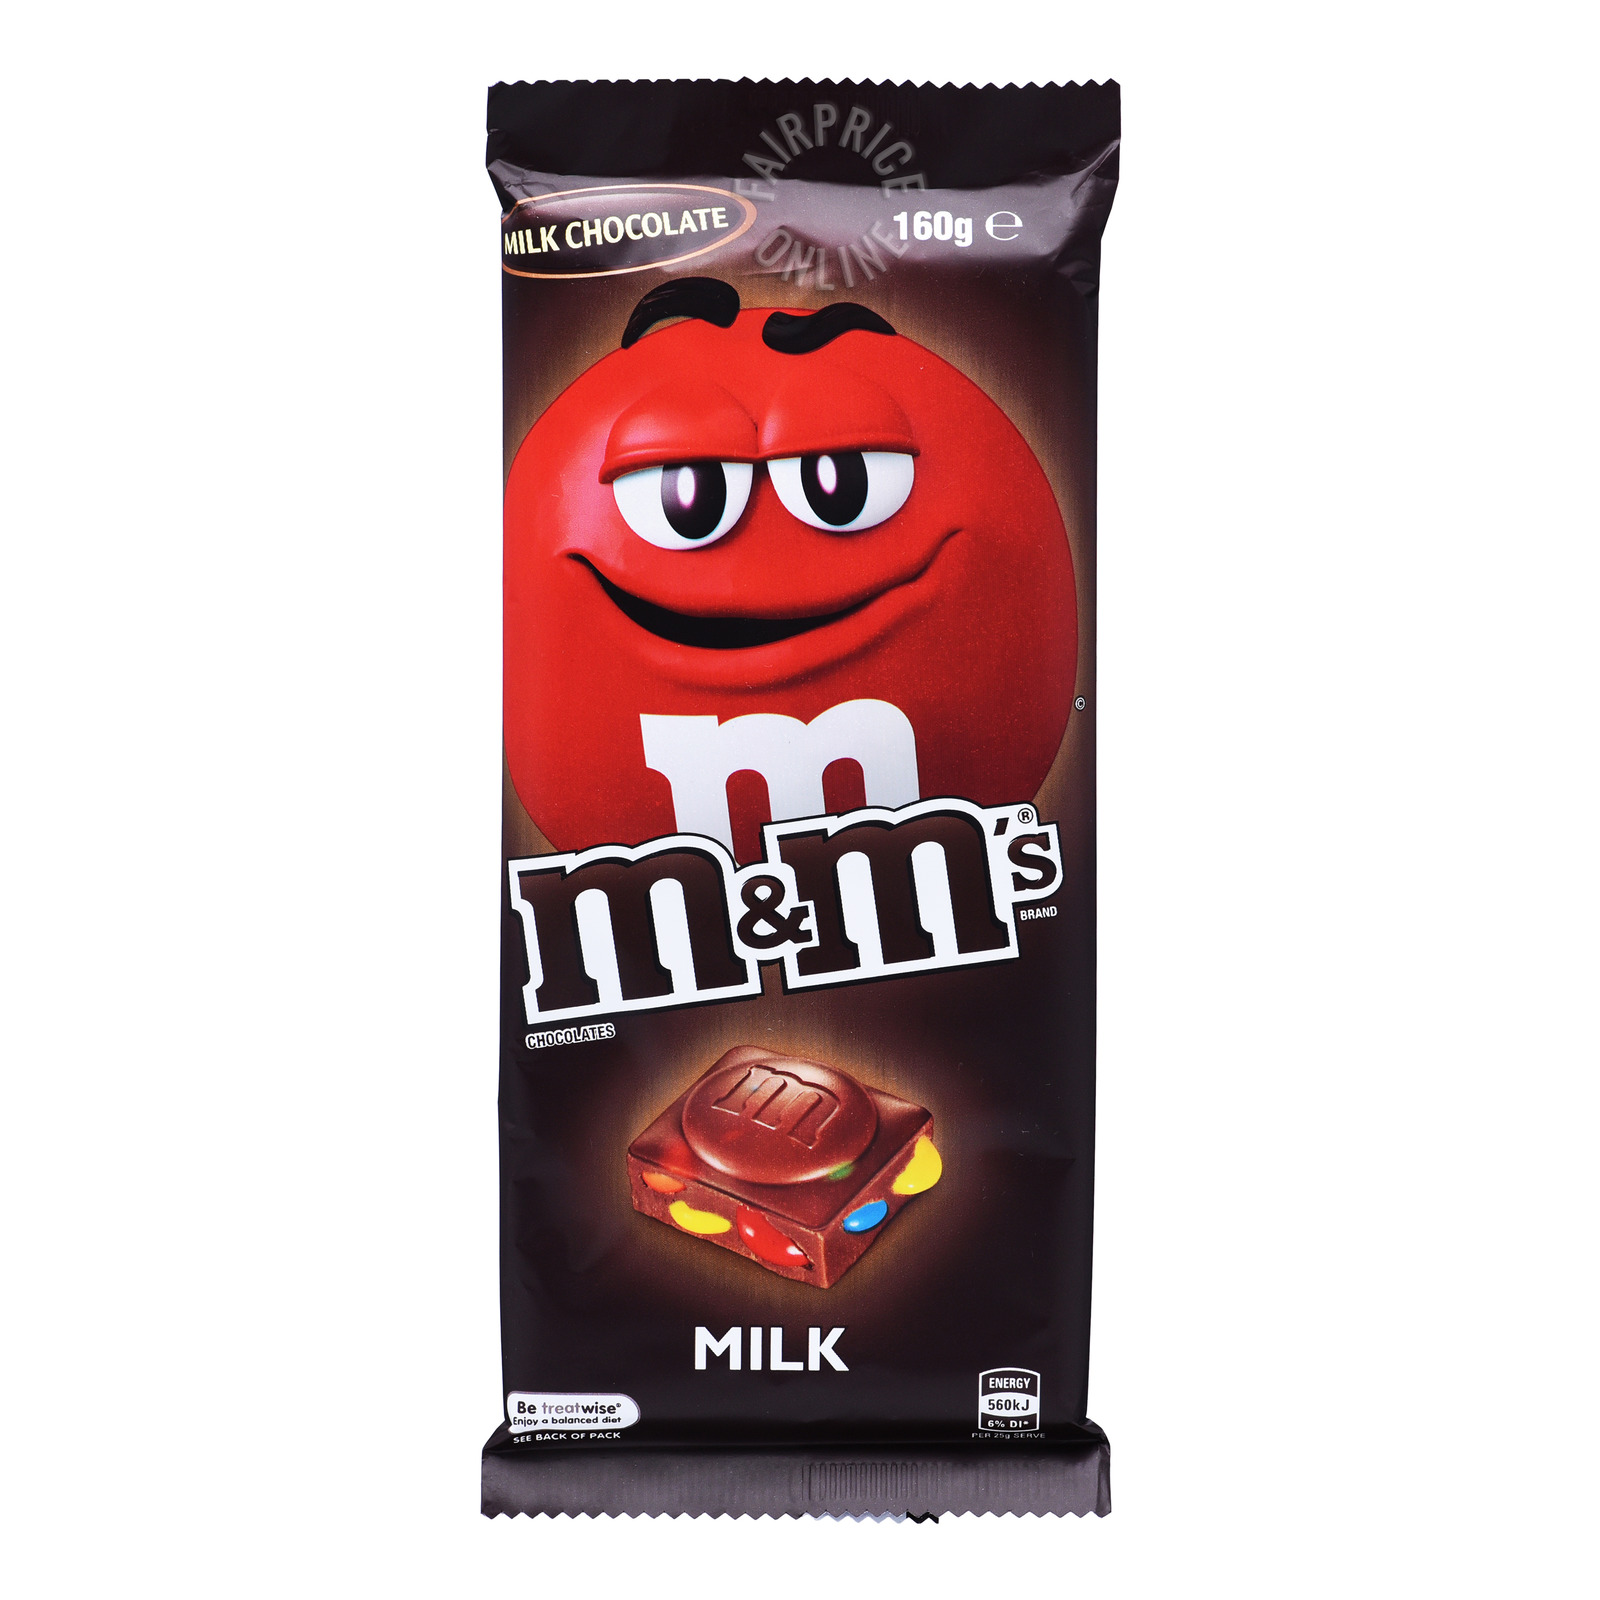 M&M’s Chocolate Bars now available at FairPrice for $4.40 - 4